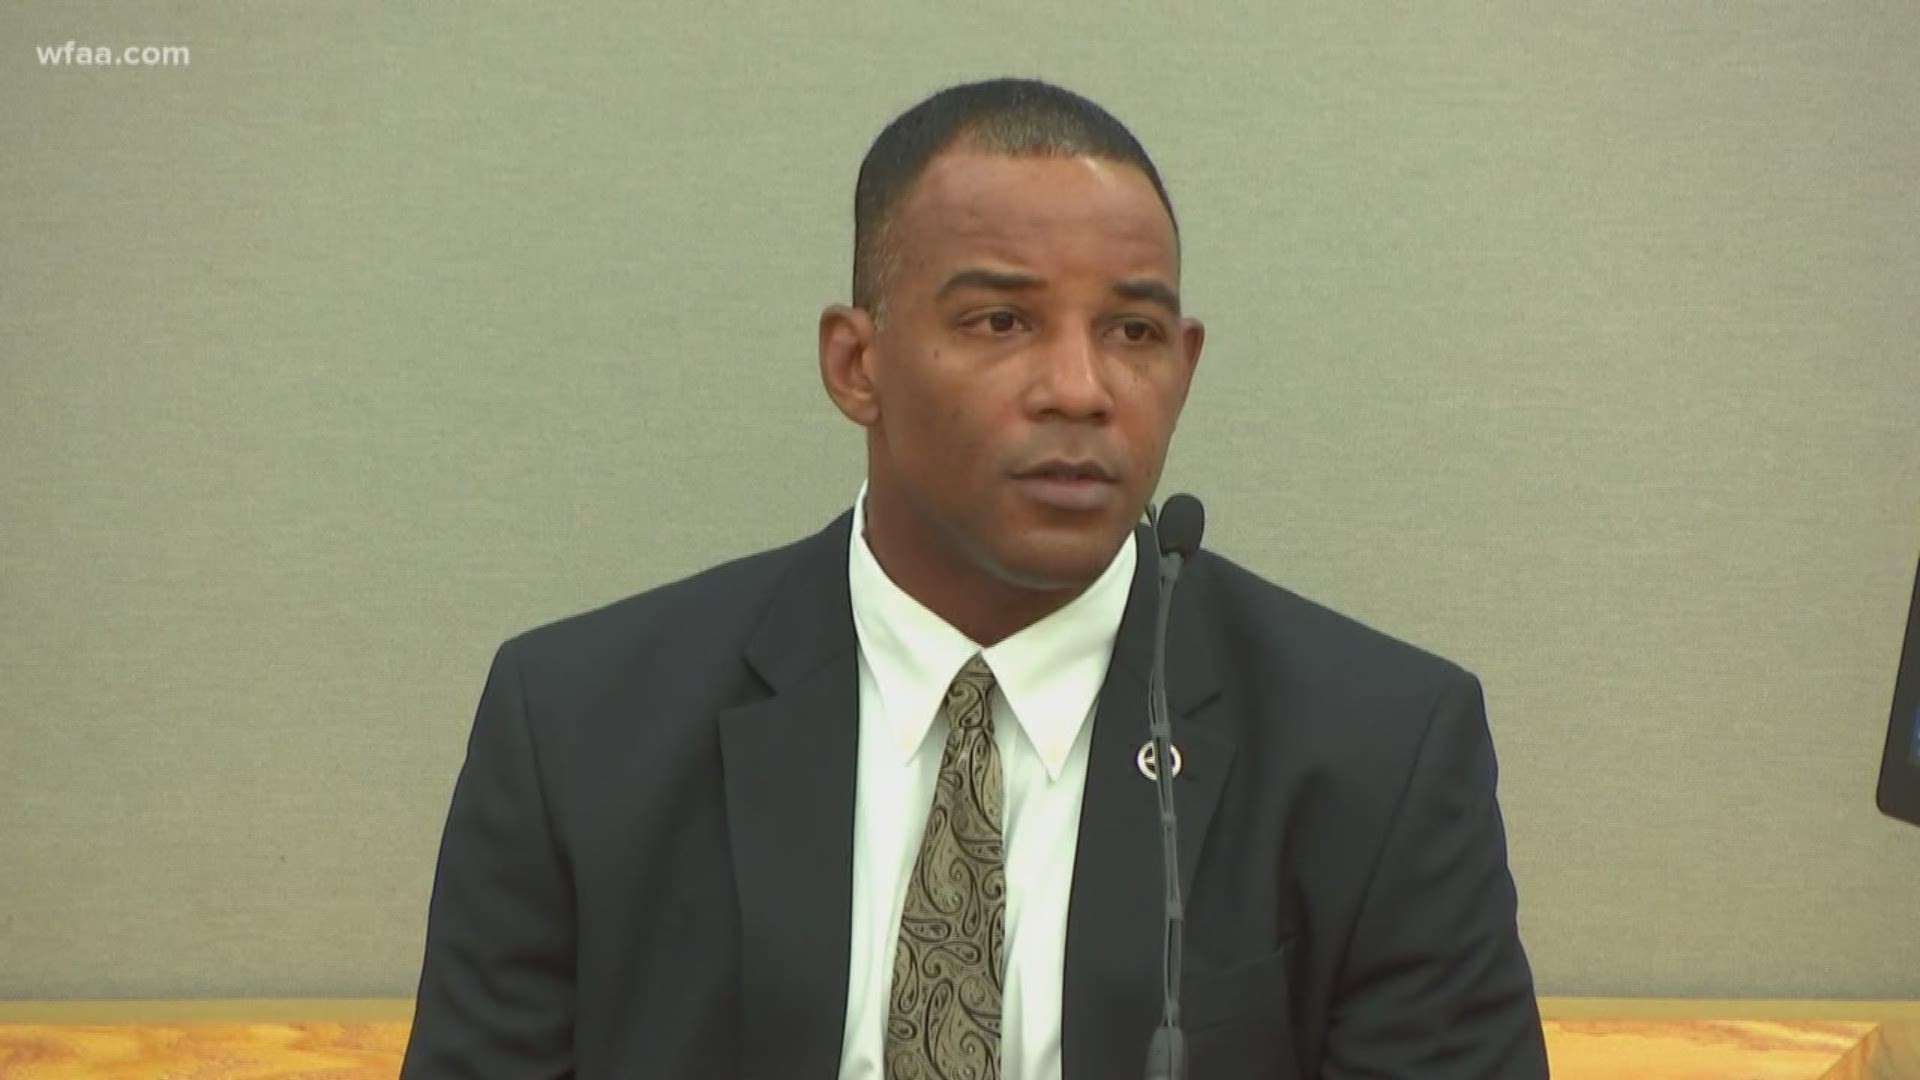 Texas Ranger David Armstrong said Wednesday that he doesn’t believe Guyger committed any crime, including murder, manslaughter or criminally negligent homicide.